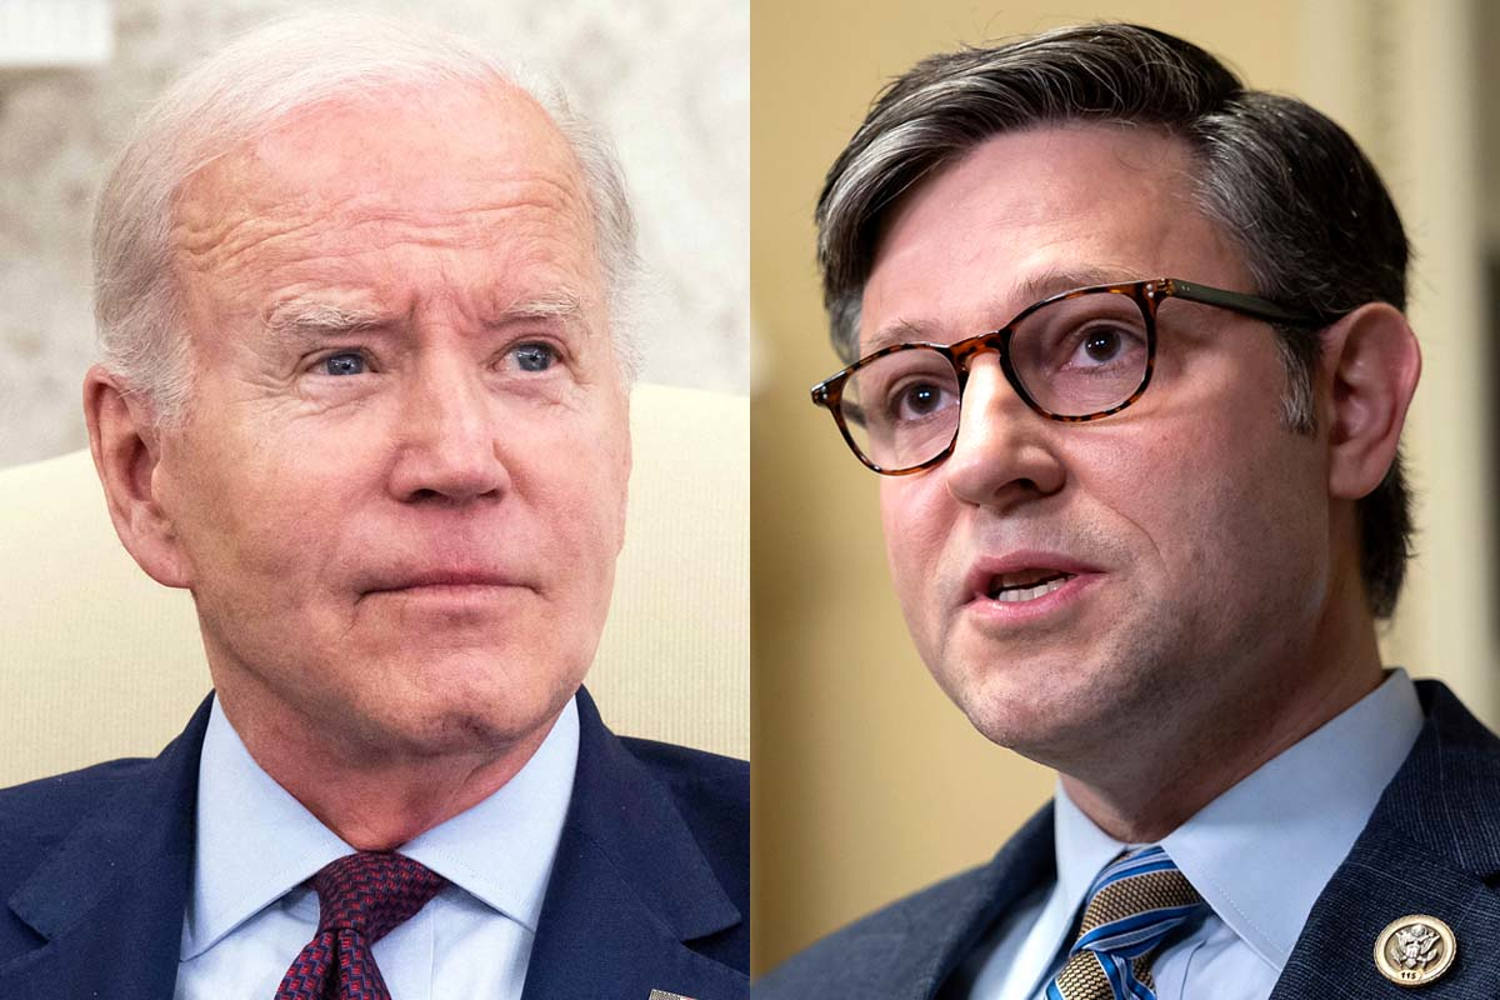 speaker mike johnson wants biden meeting before any action on ukraine and israel aid package